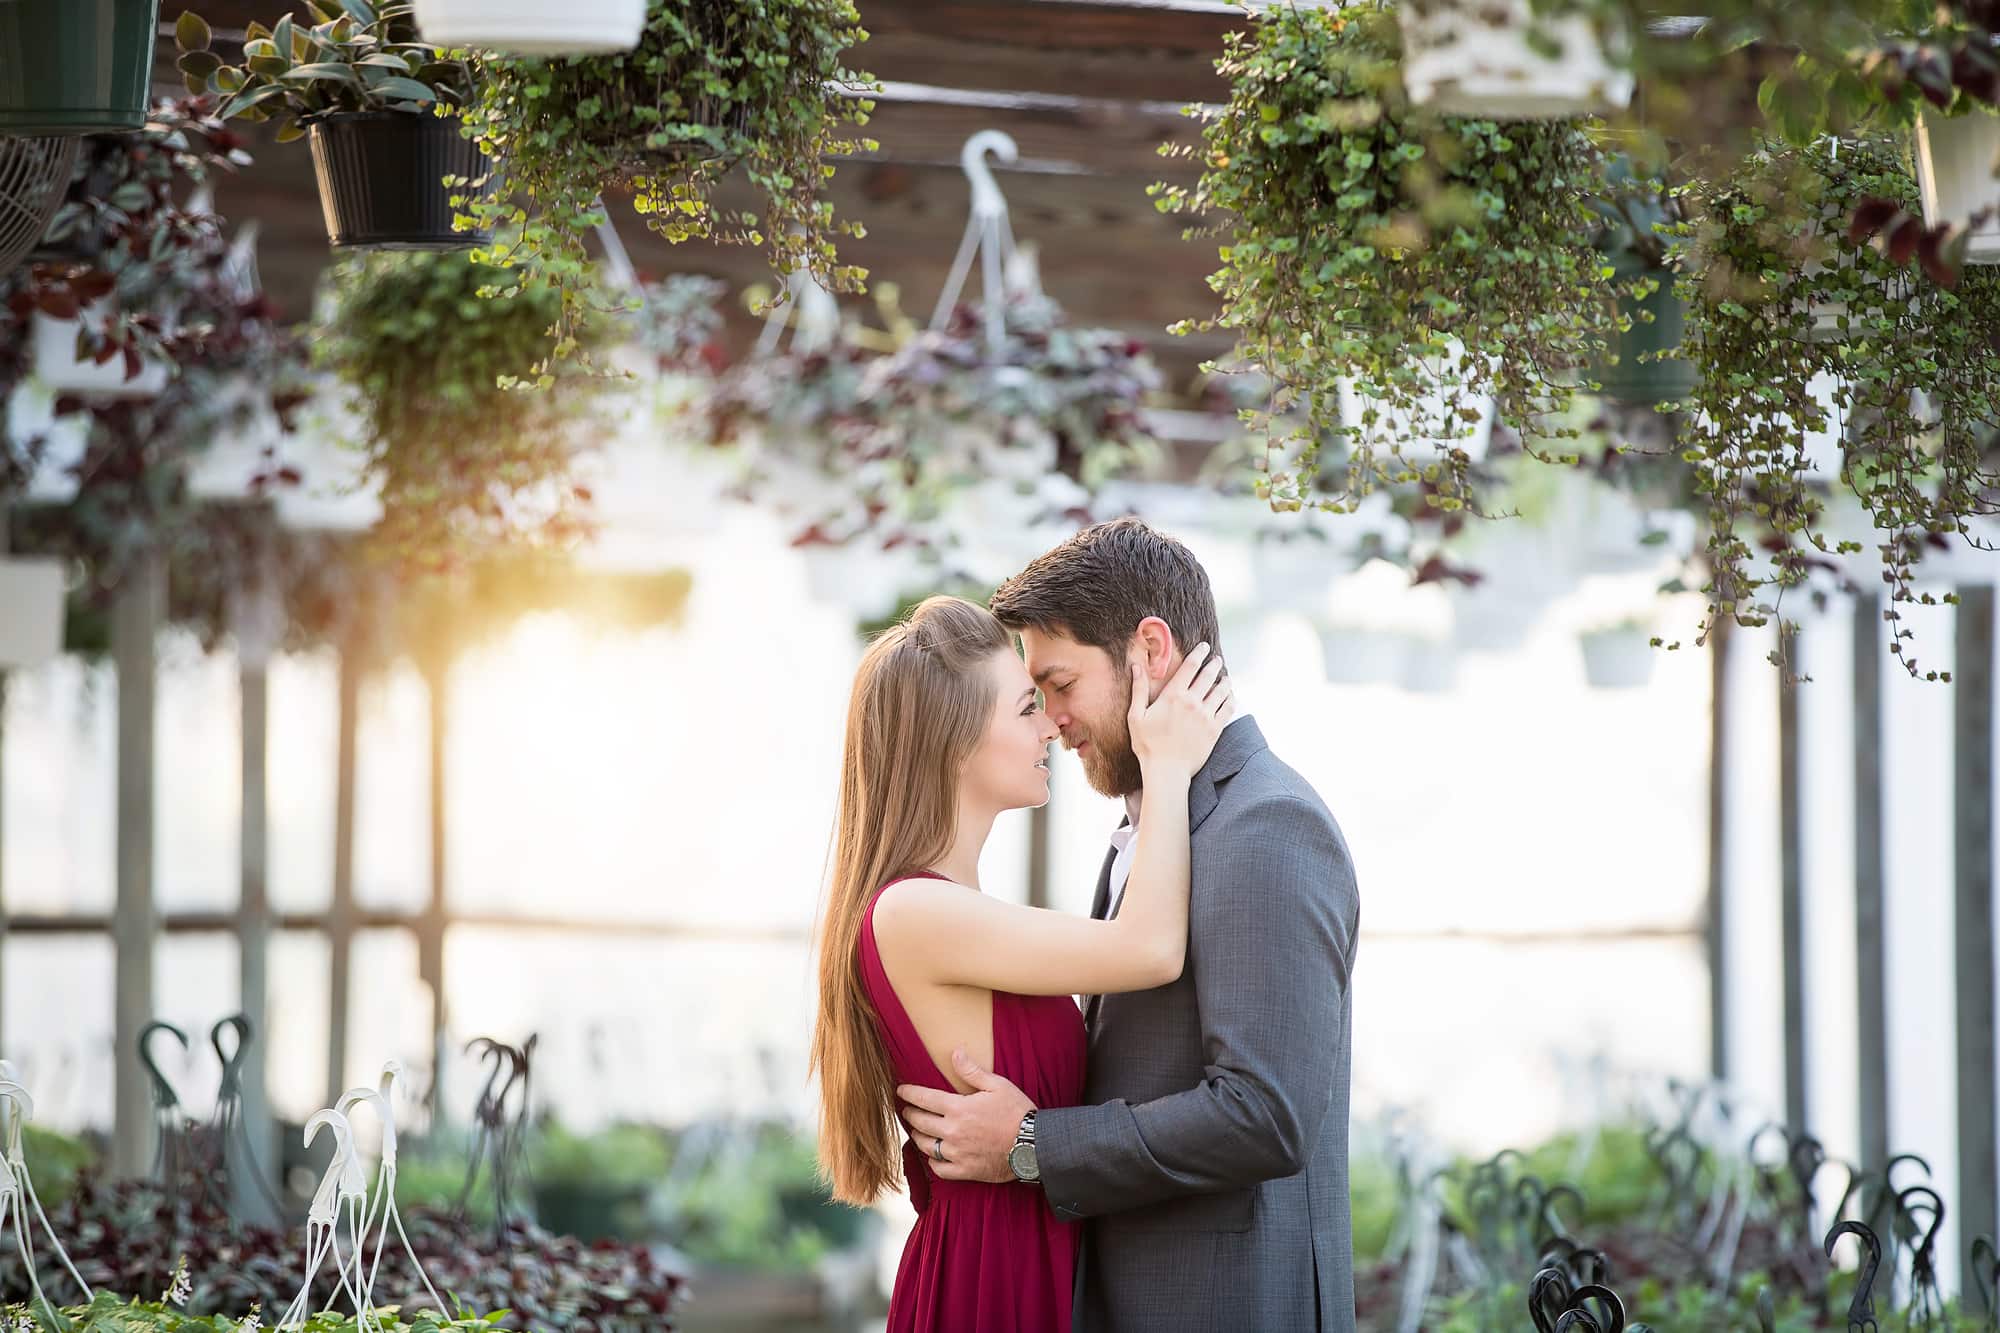 Dallas/Fort Worth & East Texas Photographer couple red greenhouse greenery engagement love